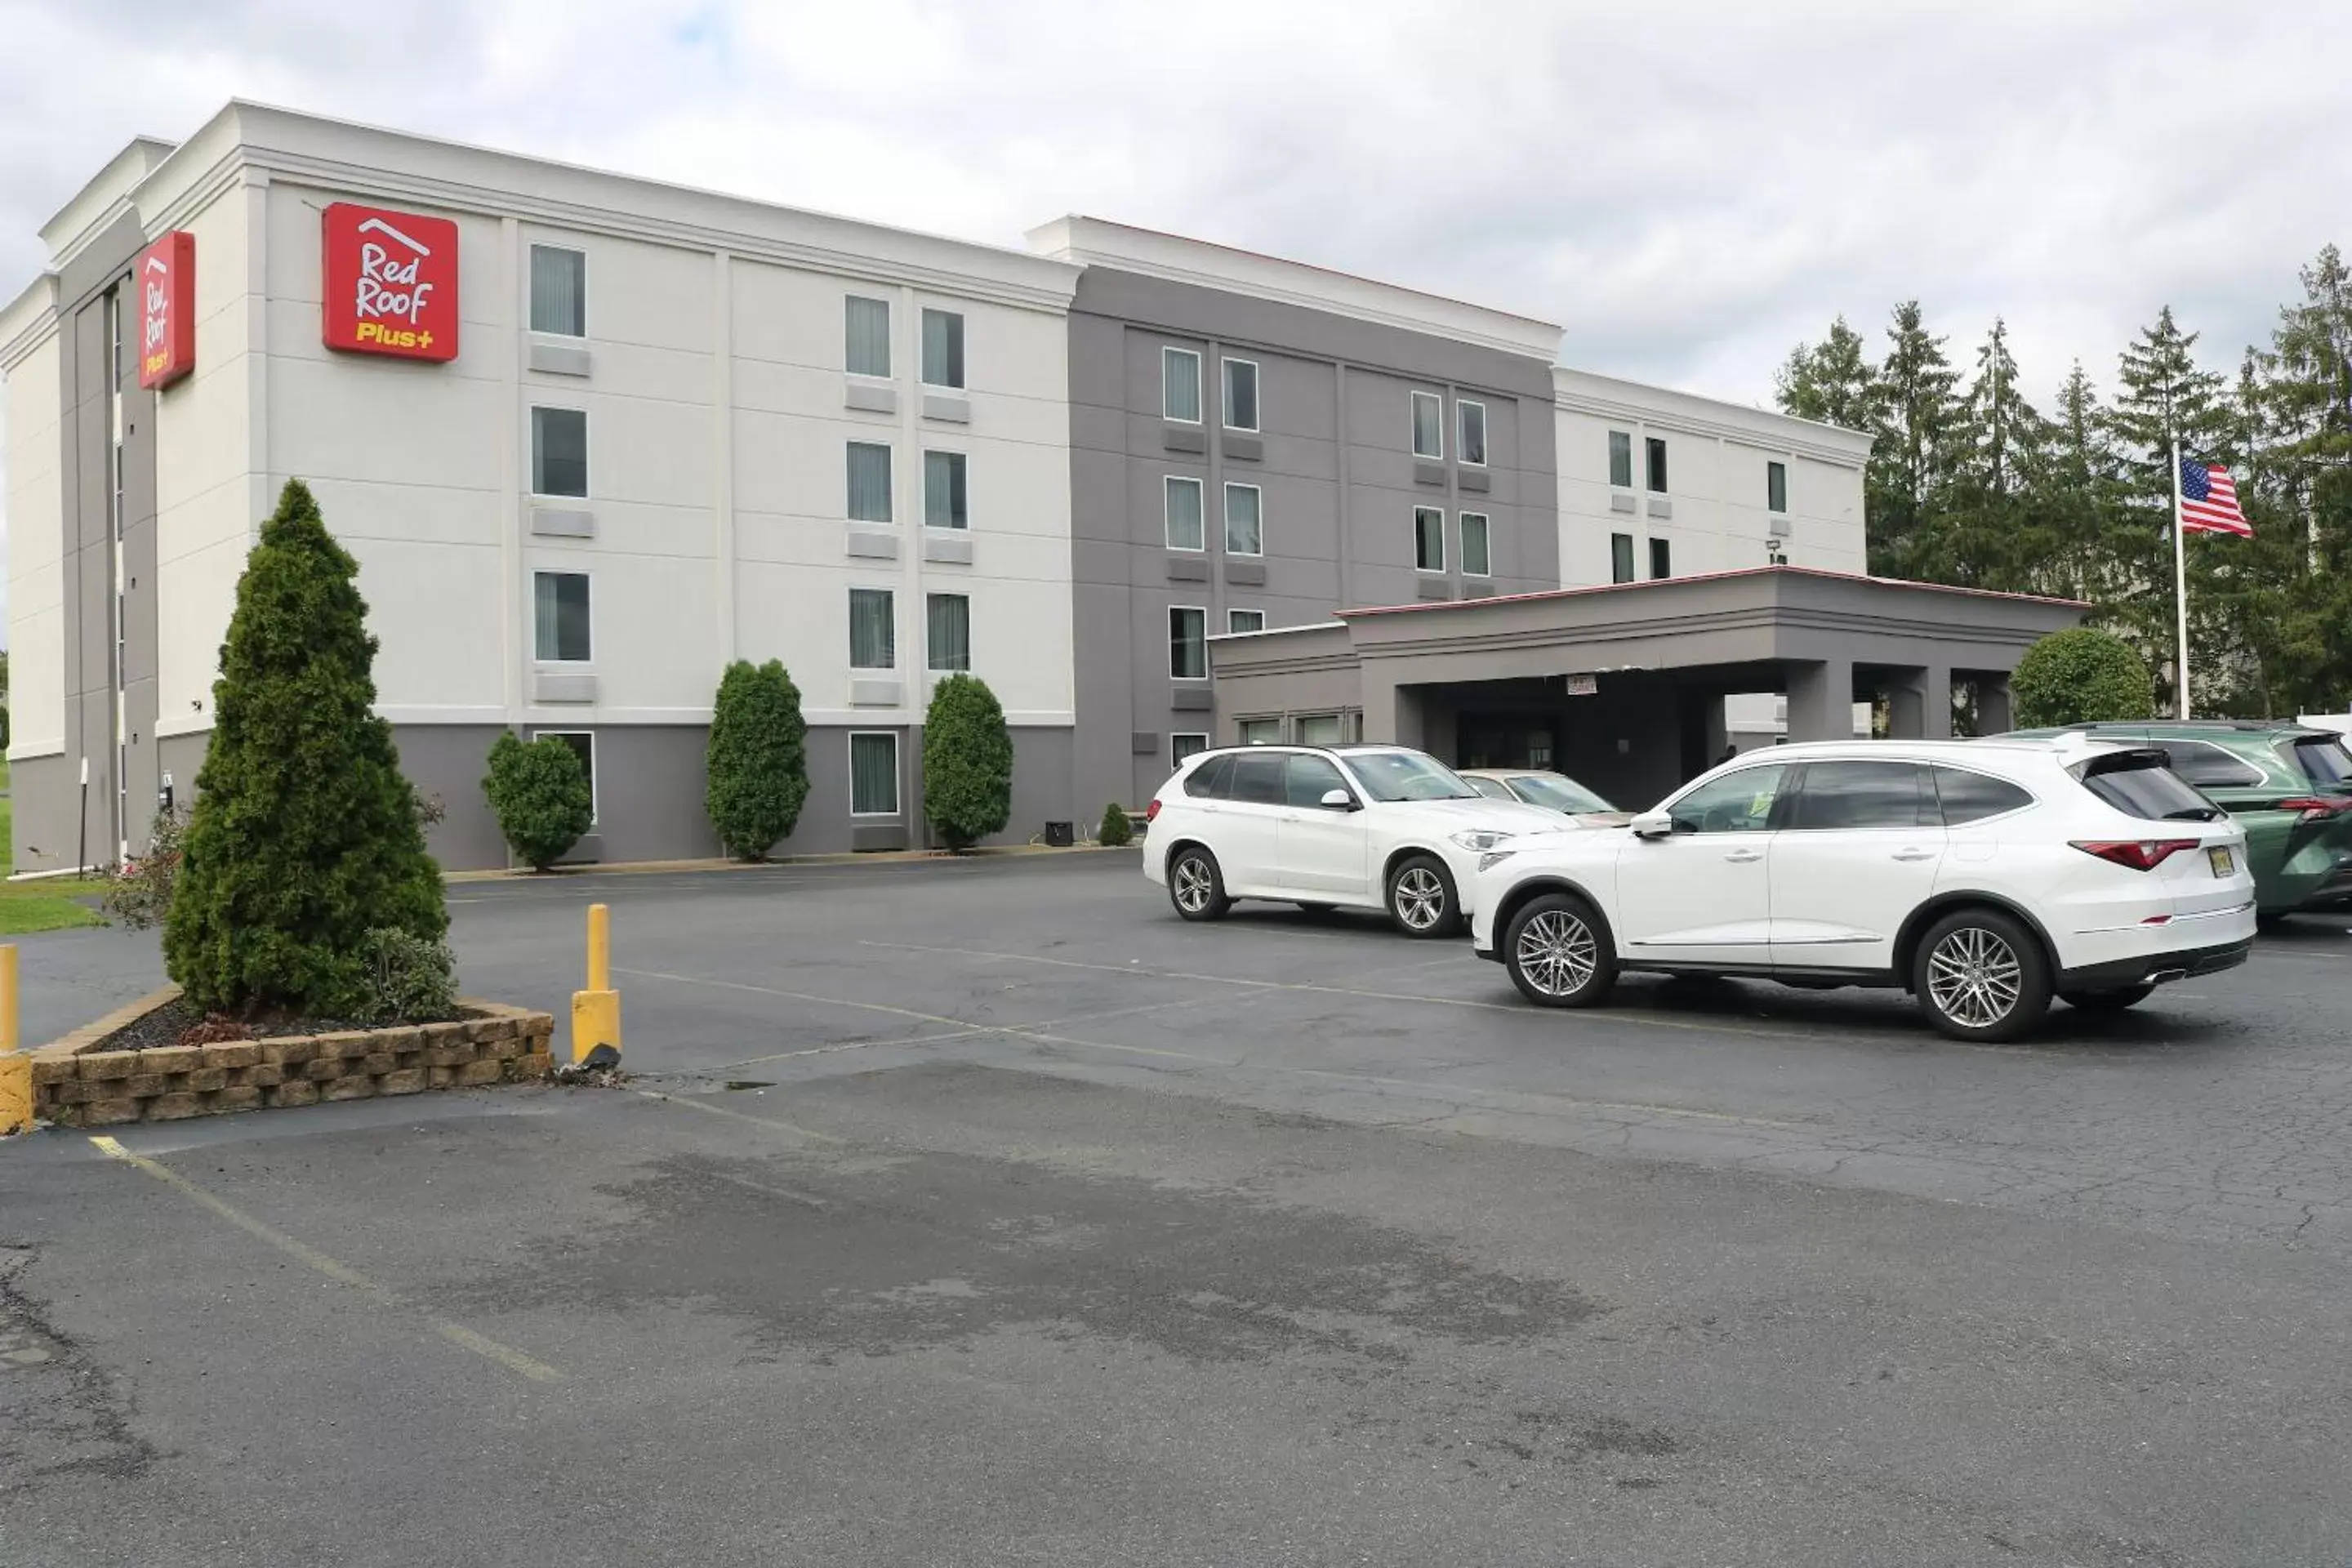 Property Building in Red Roof Inn PLUS Easton